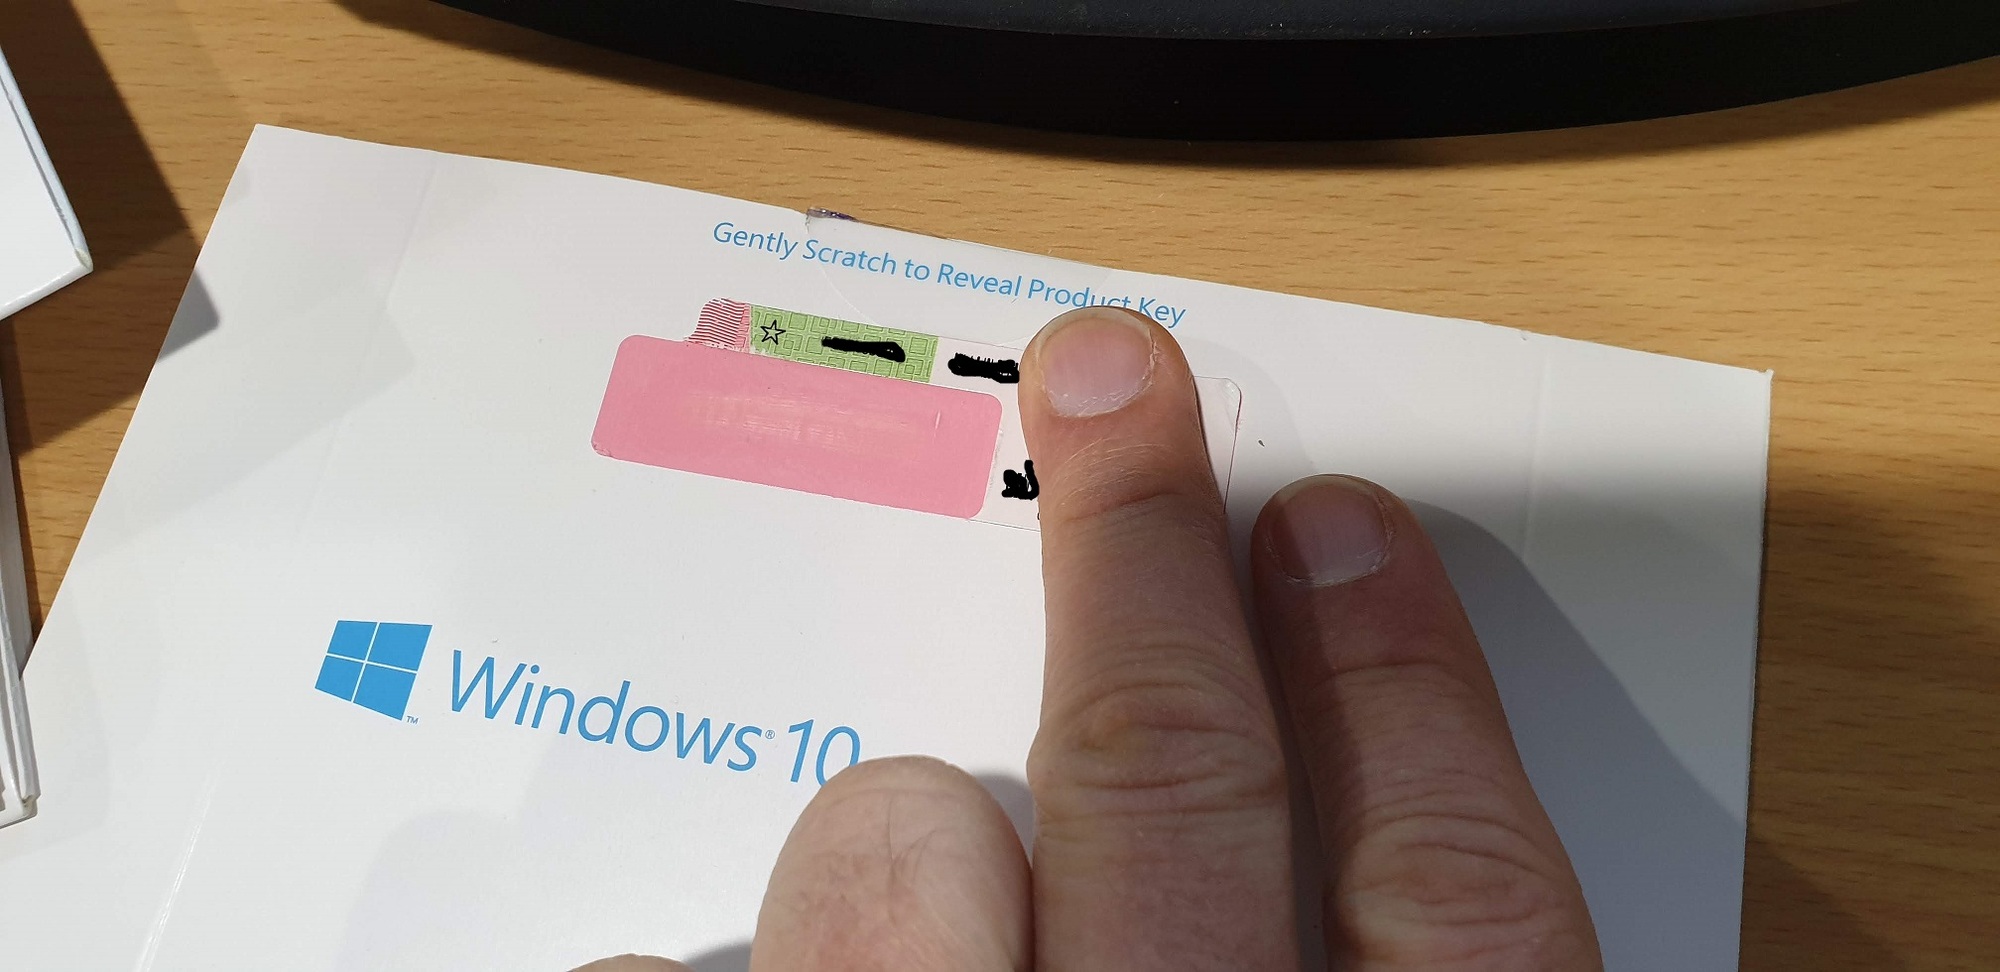 'Gently scratch to reveal product key' isn't scratchable on Windows 10 licence pink tape -... d9db99ad-93ca-4e07-bc9f-783aadc80cec?upload=true.jpg